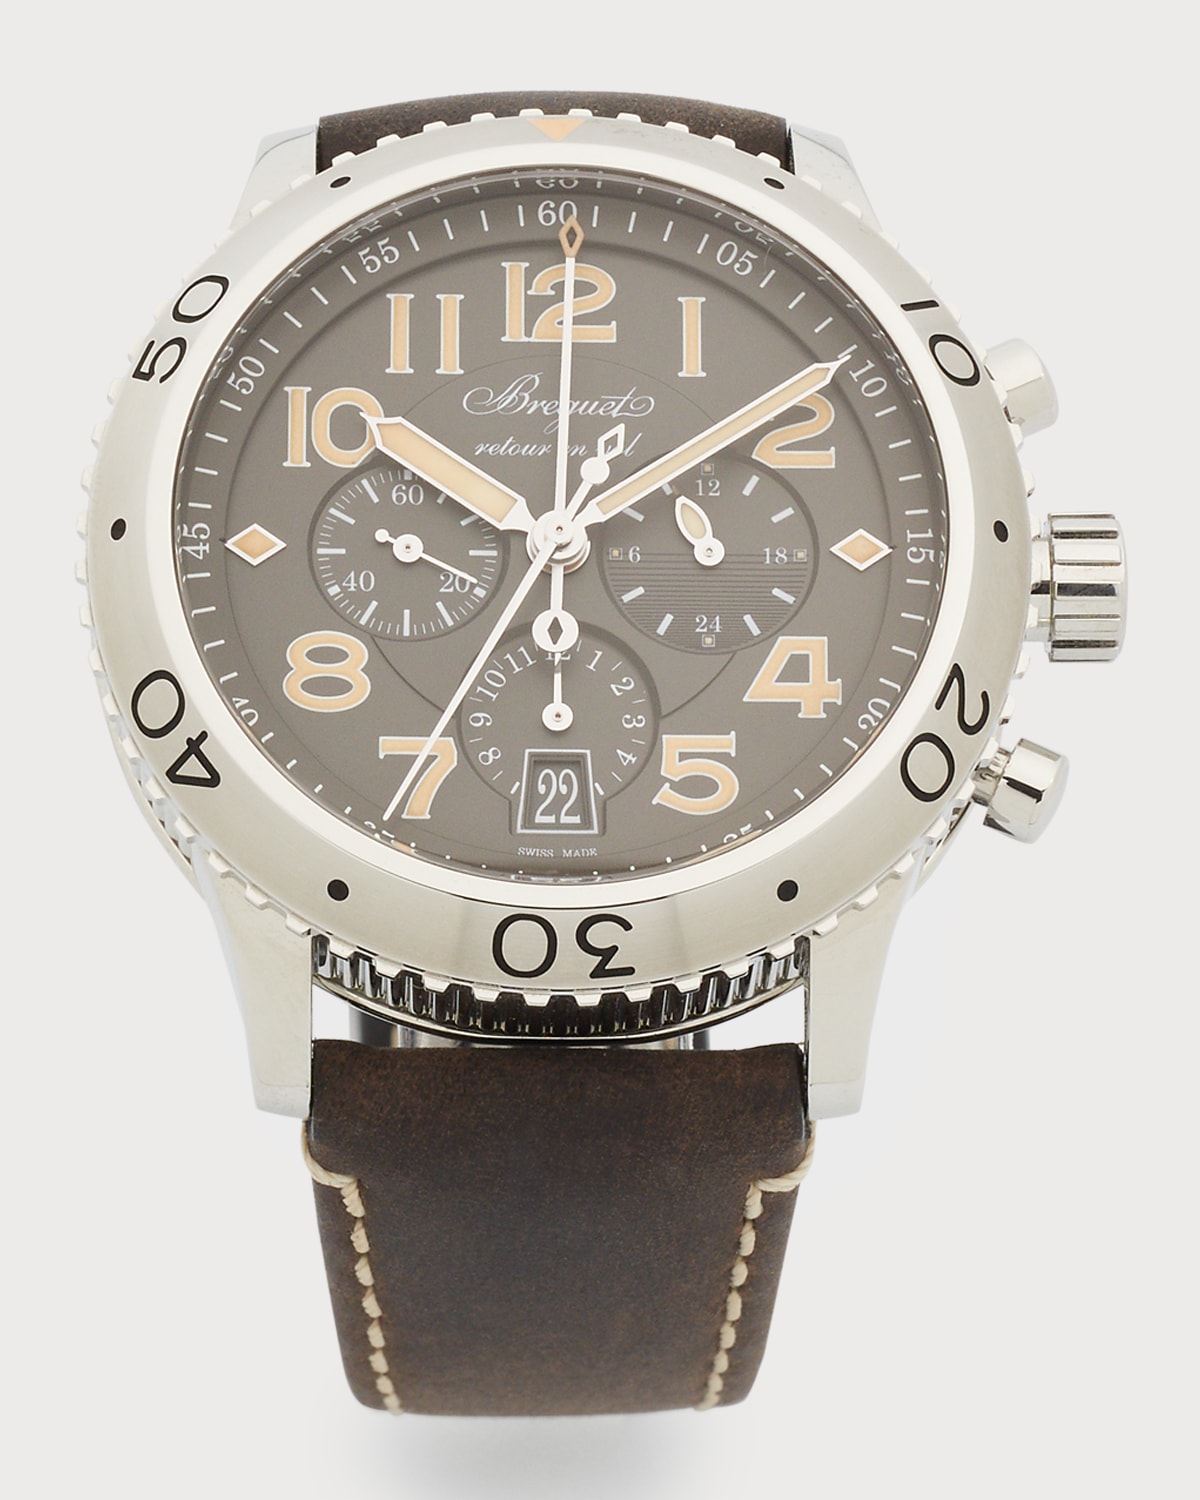 Breguet 42mm Type XX1 Chronograph Watch w/ Leather Strap, Brown